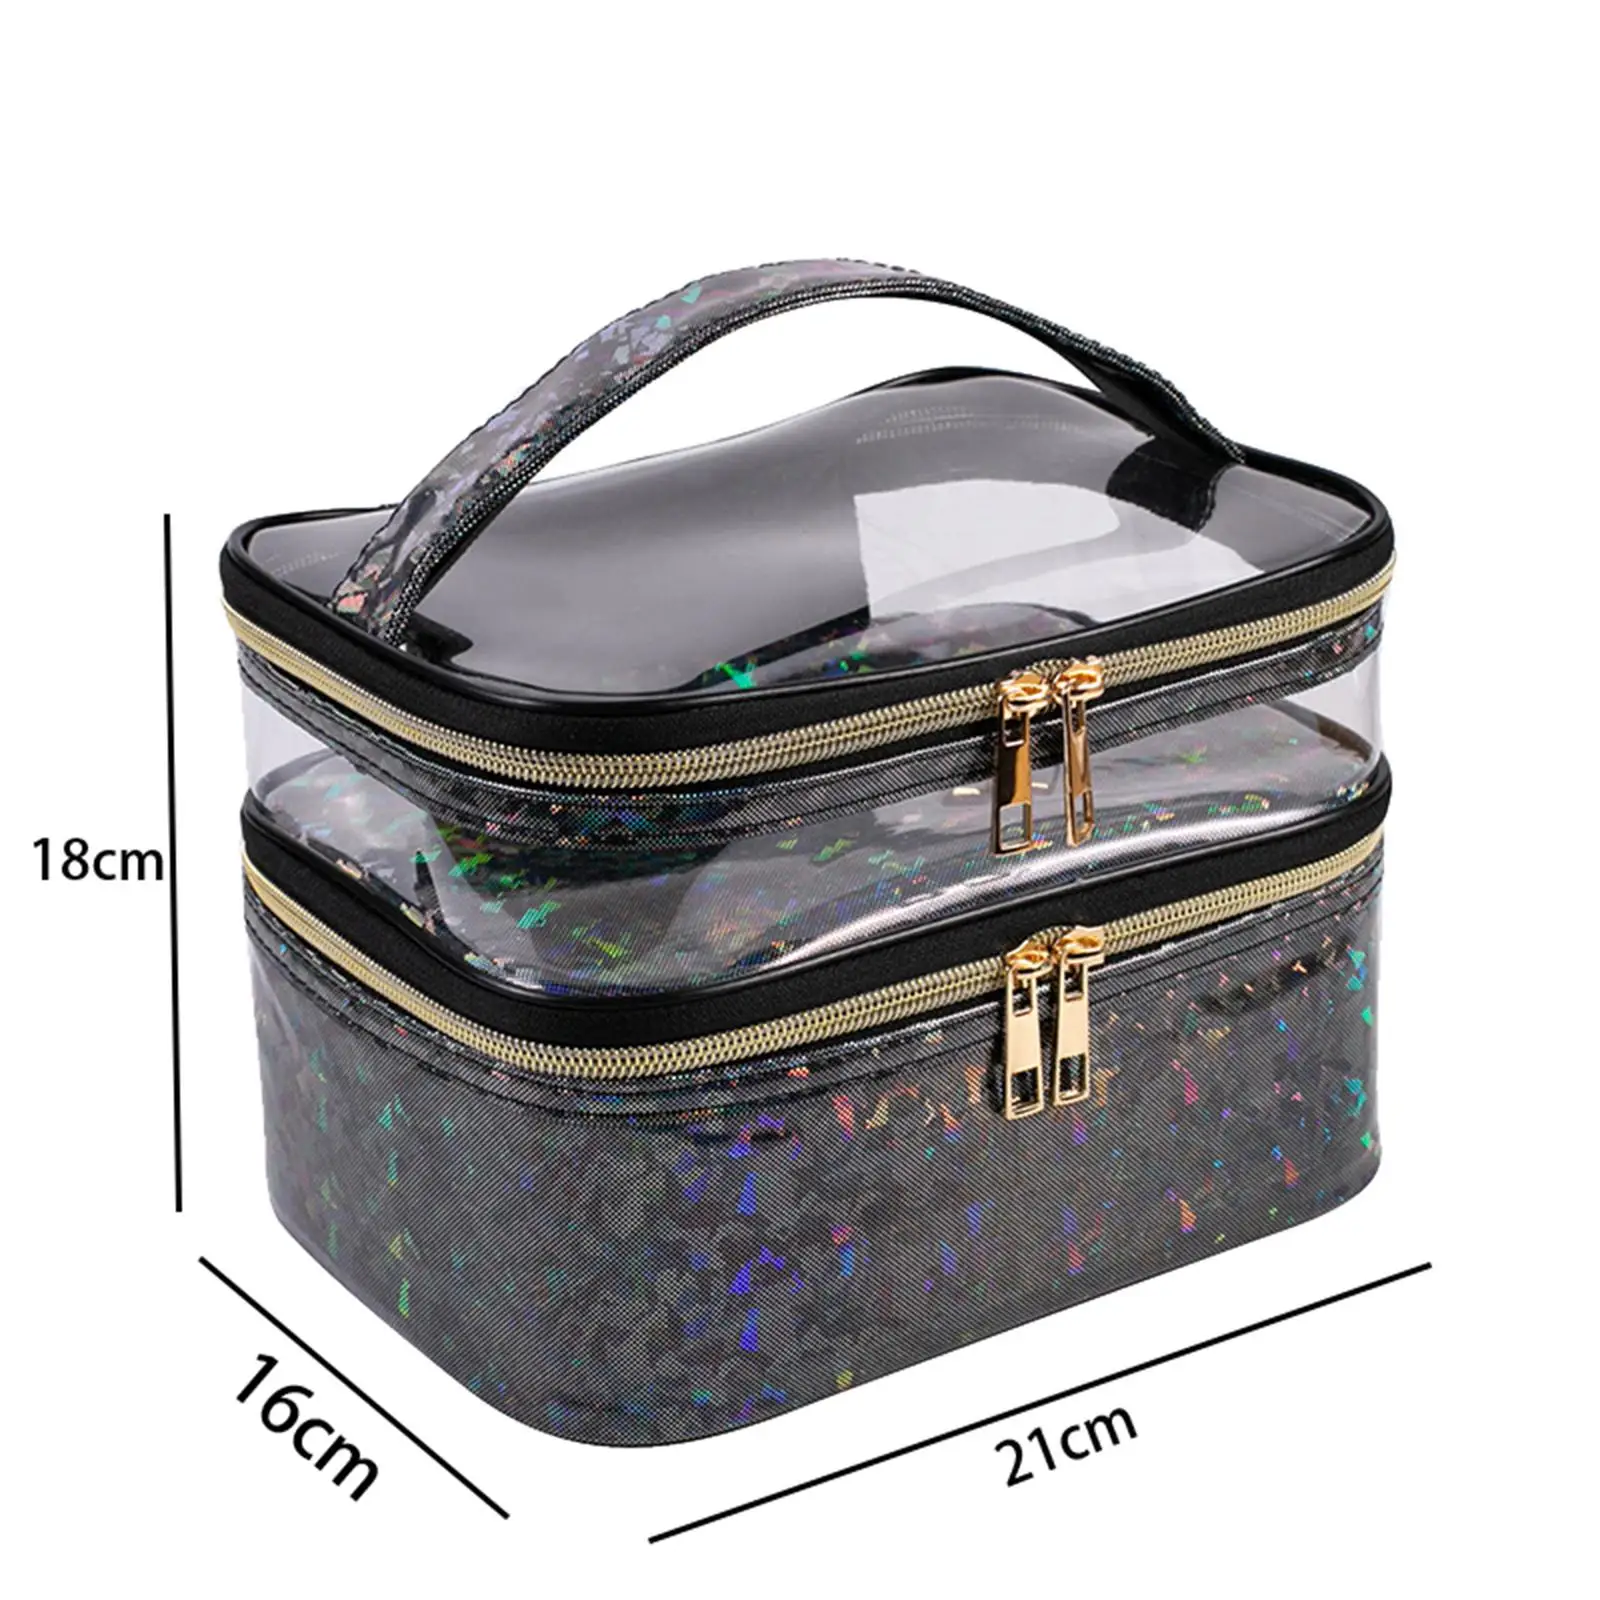 Double Layer Cosmetic Bag Travel Makeup Bag Clear Waterproof for Girls Women Toiletry Holder shower Bags cosmetics handbag